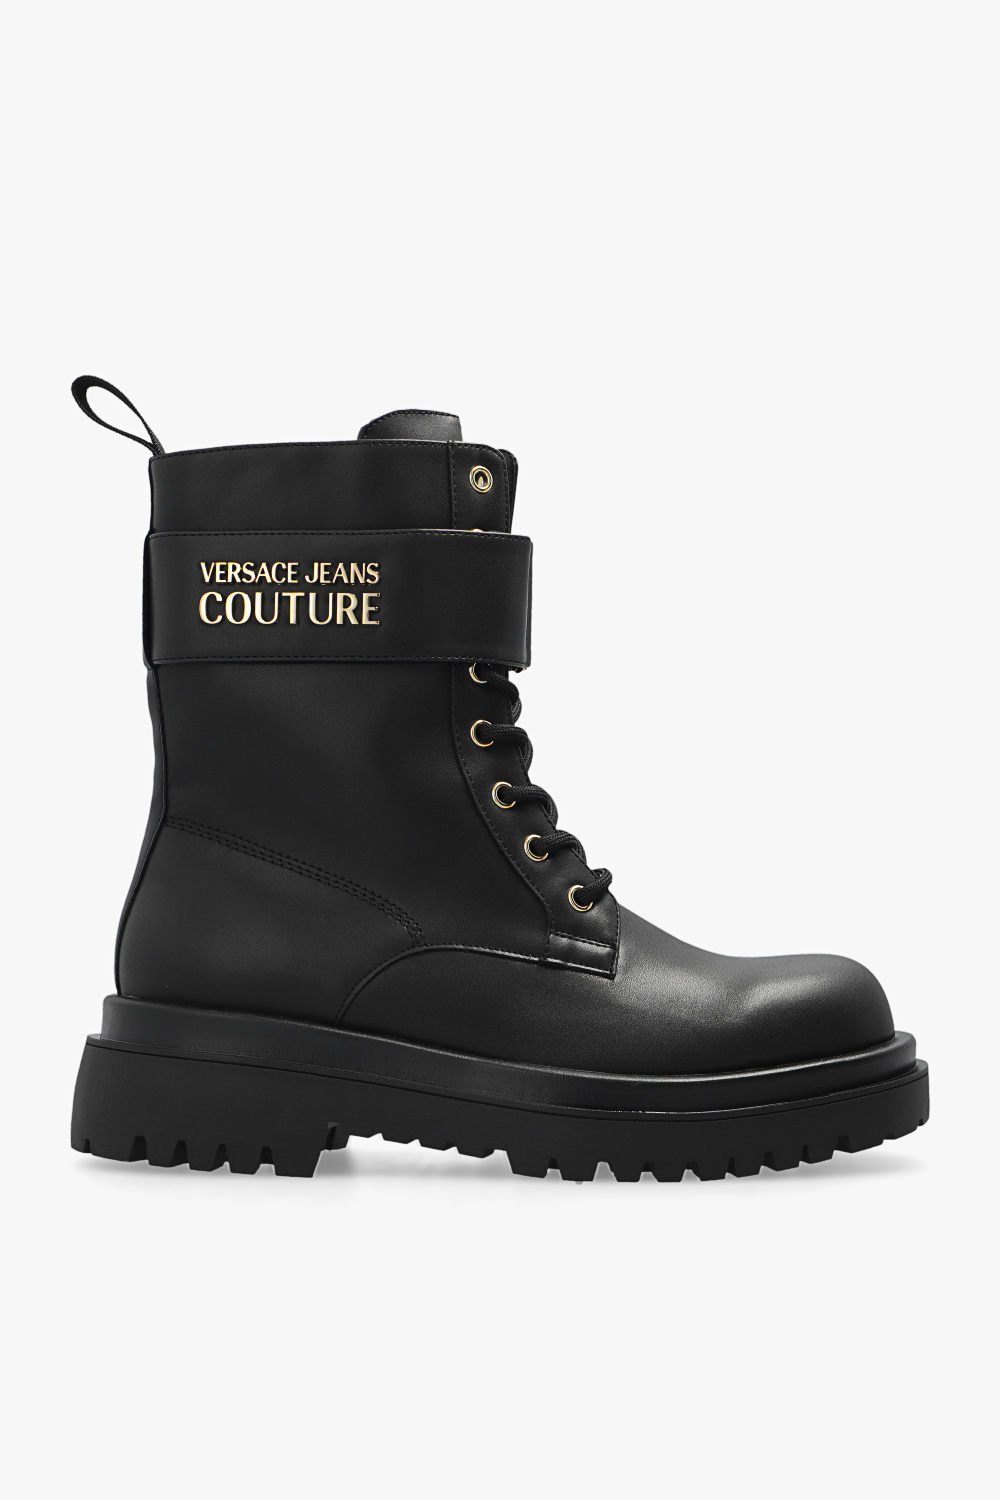 Stay on the front side of fashion with these cute boots Combat boots